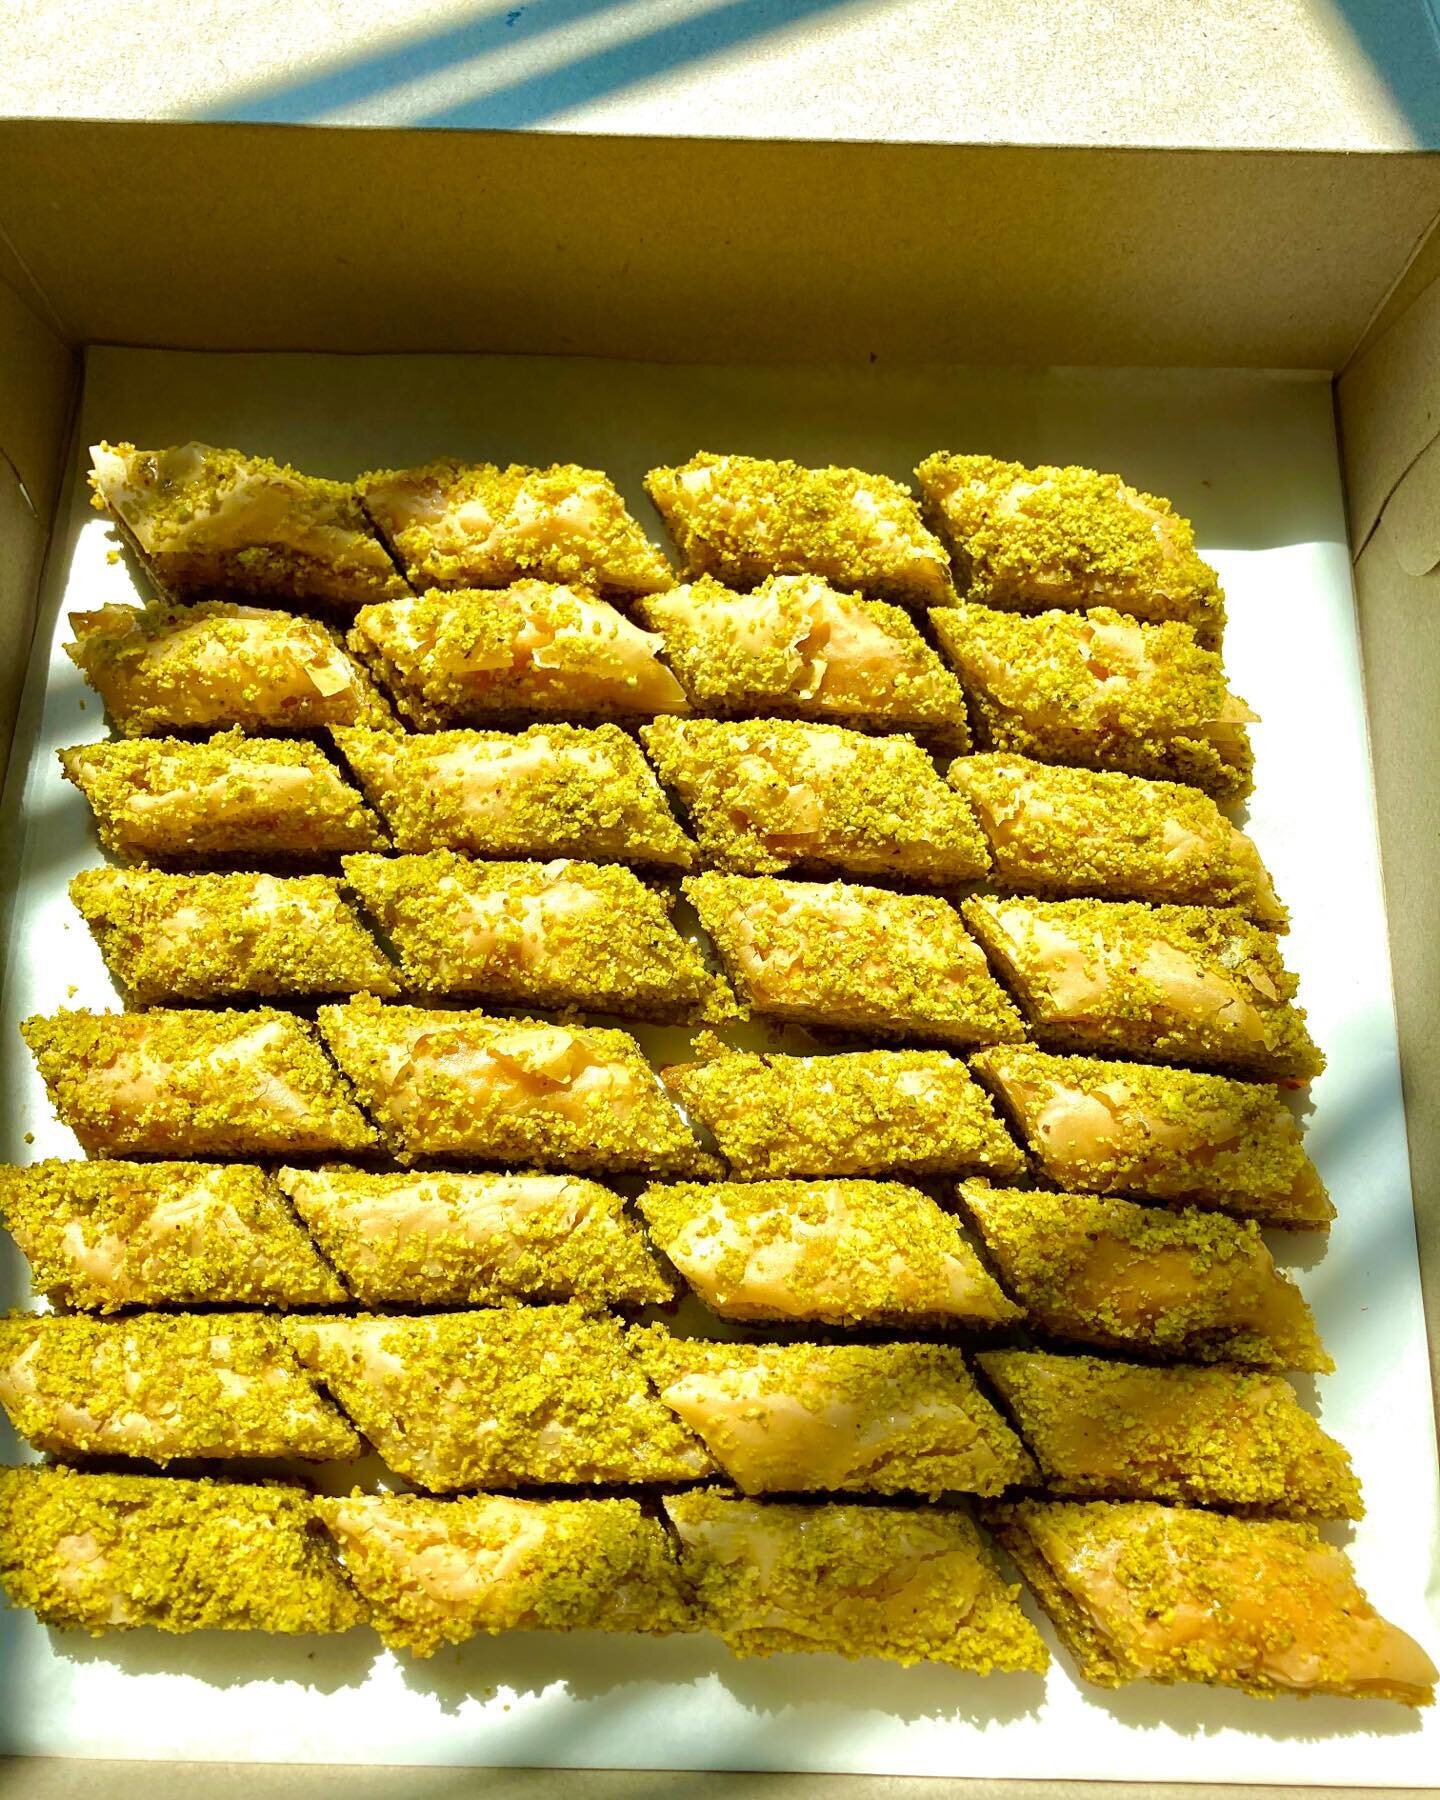 Special order of the classic pistachio baklava ready to go! Happy weekend y&rsquo;all 🥳 get yours next week at www.bintisbakery.com #baklava #mymgm